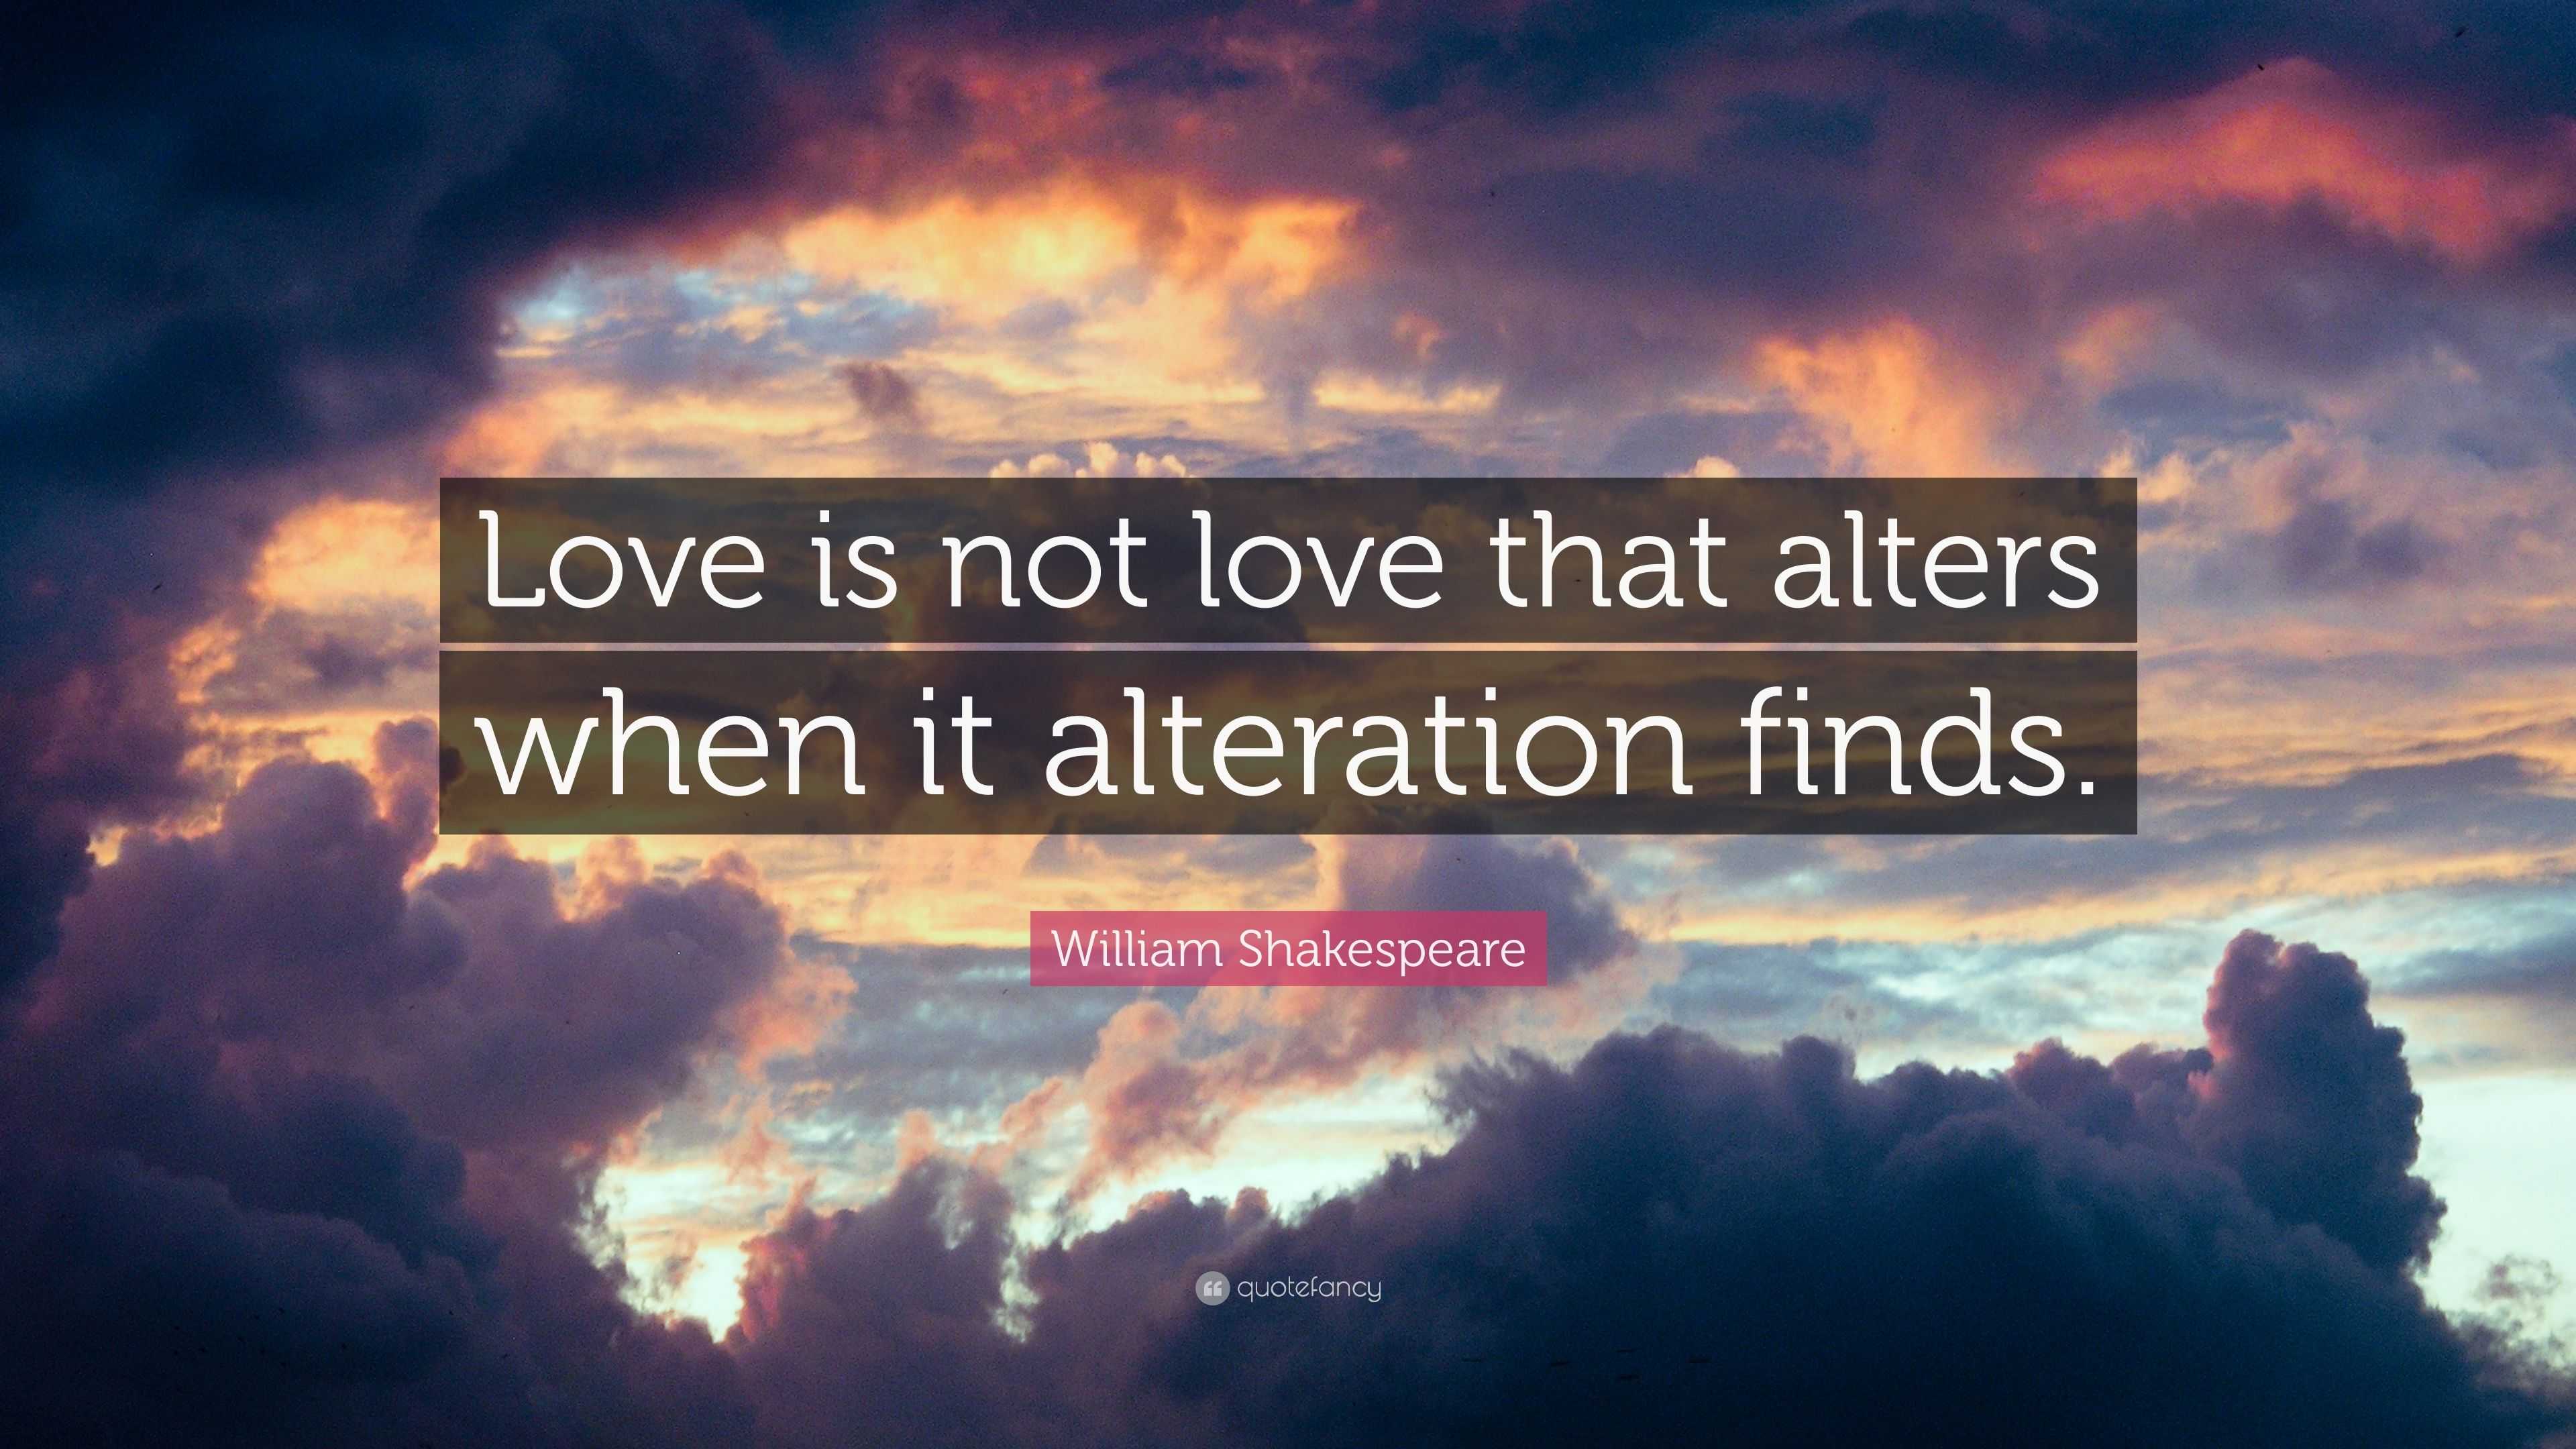 William Shakespeare Quote Love is not love that alters when it